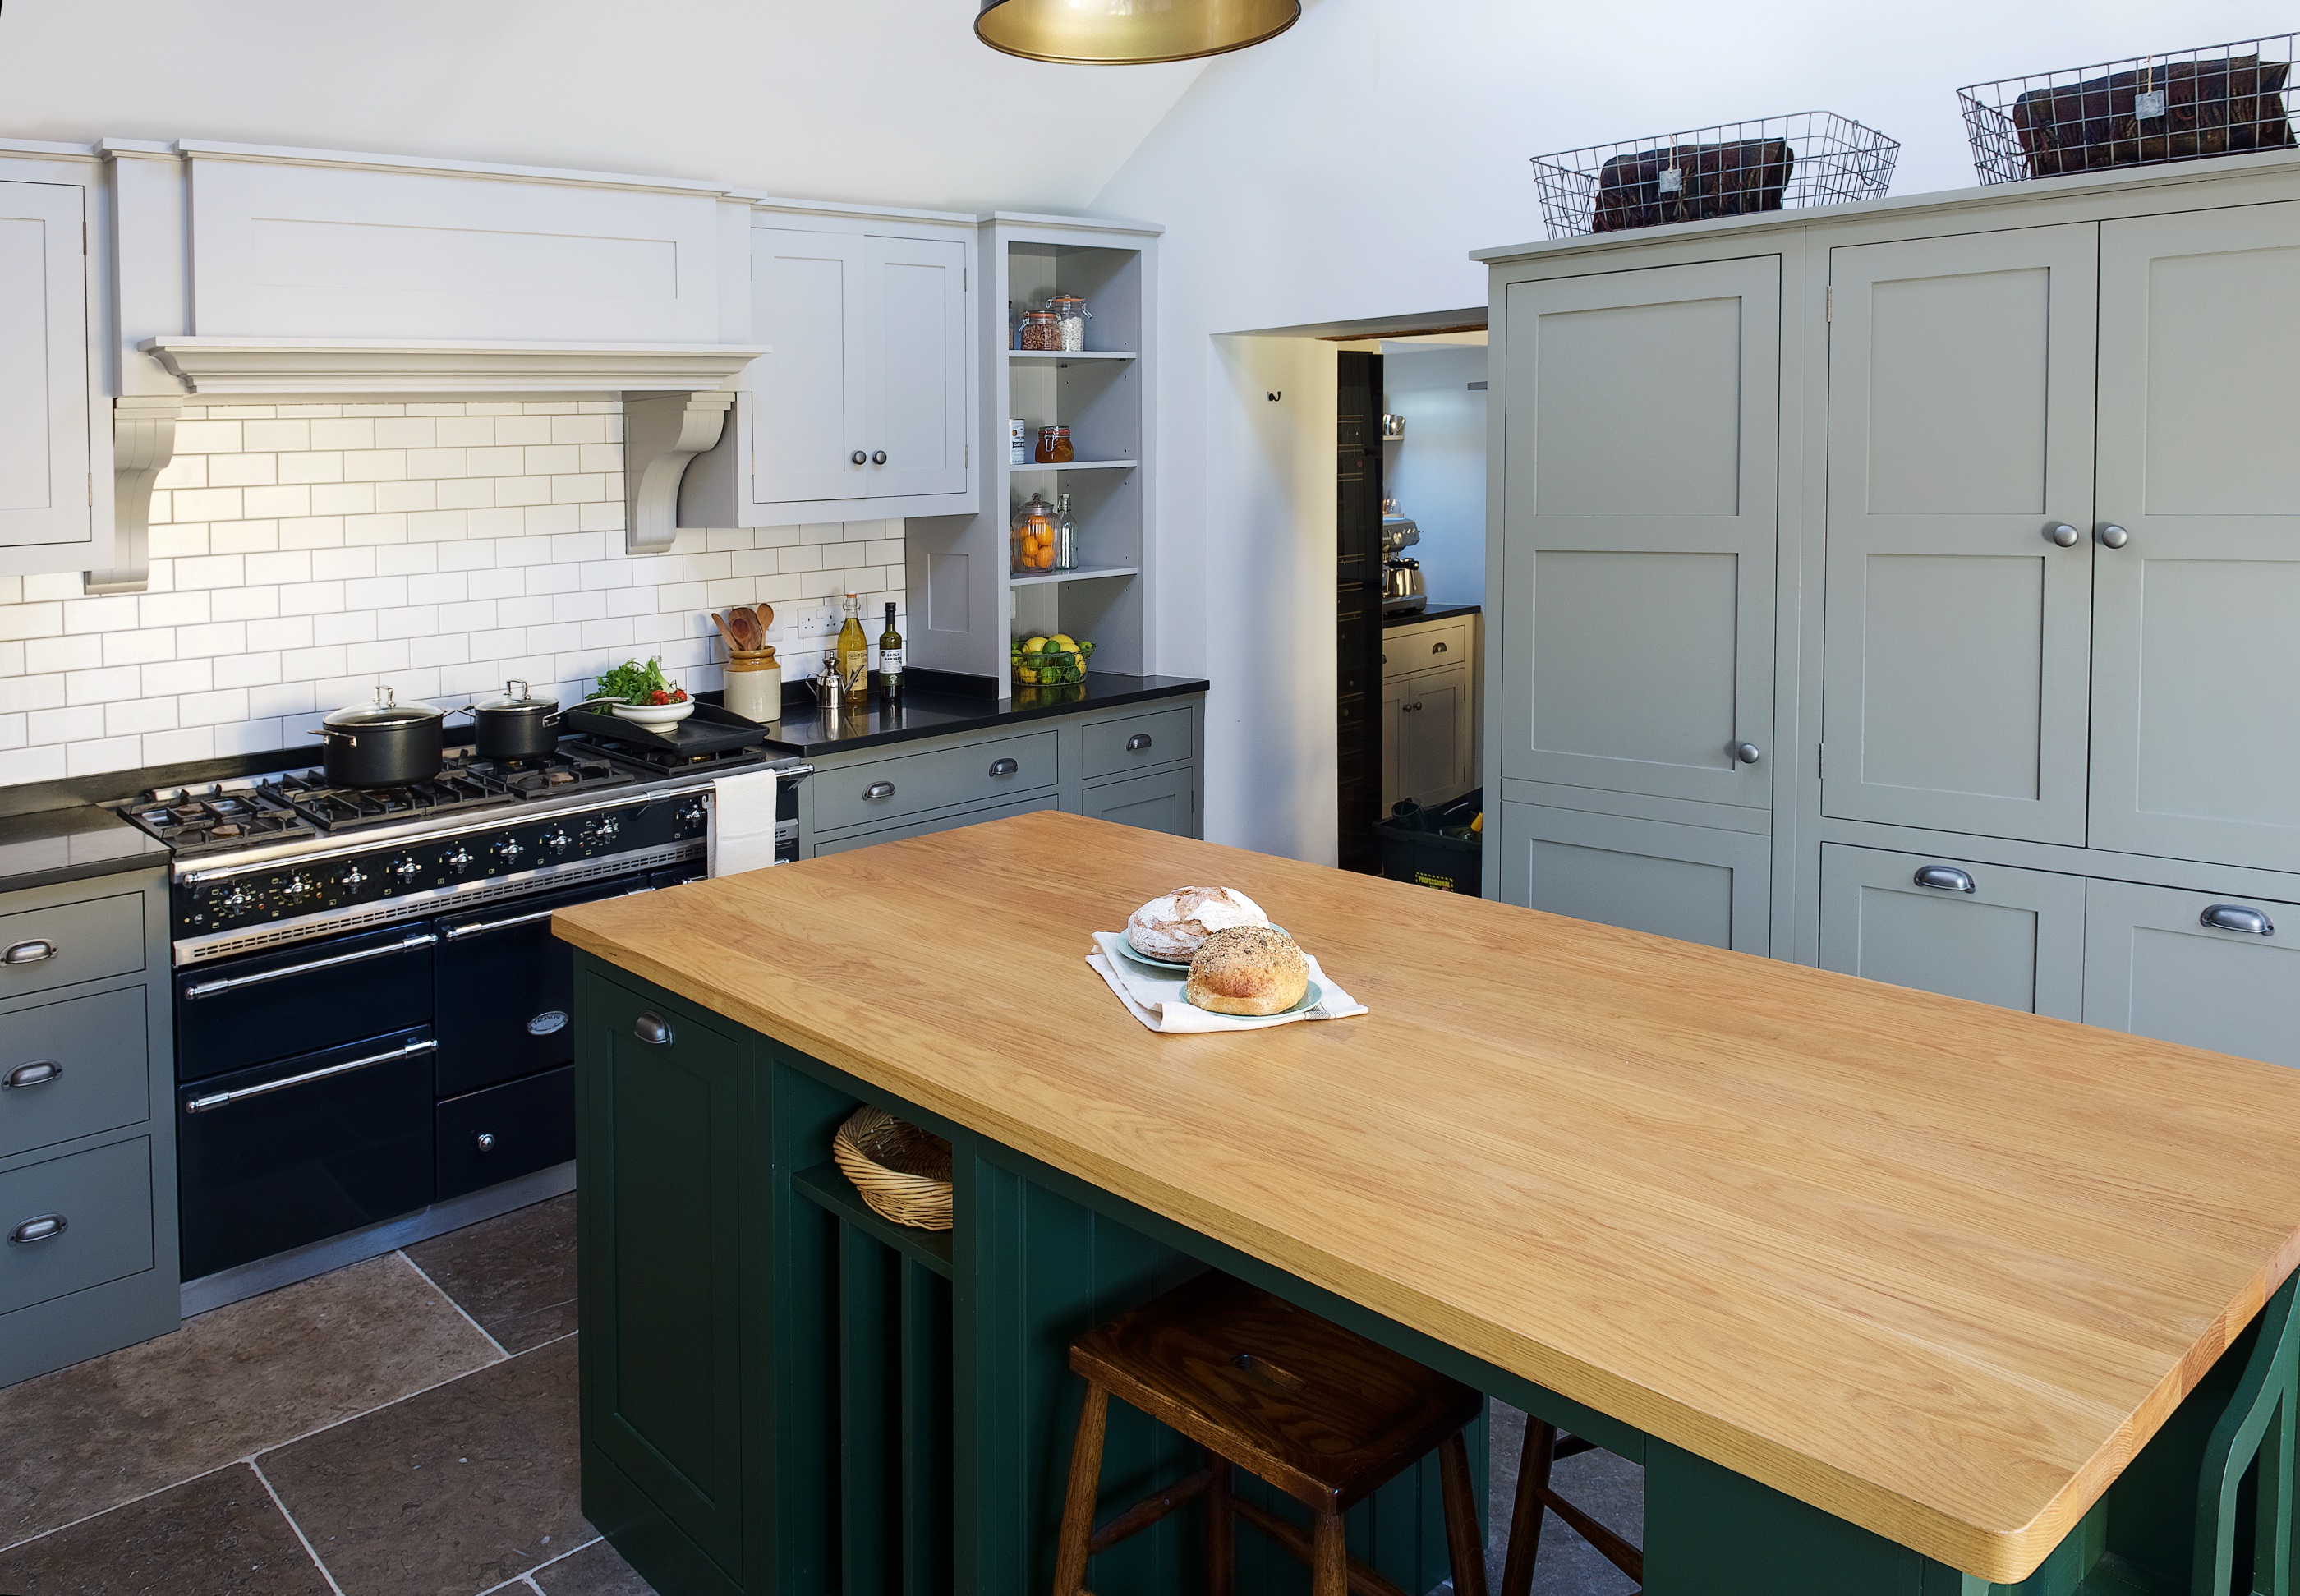 Bespoke shaker kitchen handpainted in Little Greene with a large island with oak worktop and white metro tile splashaback.